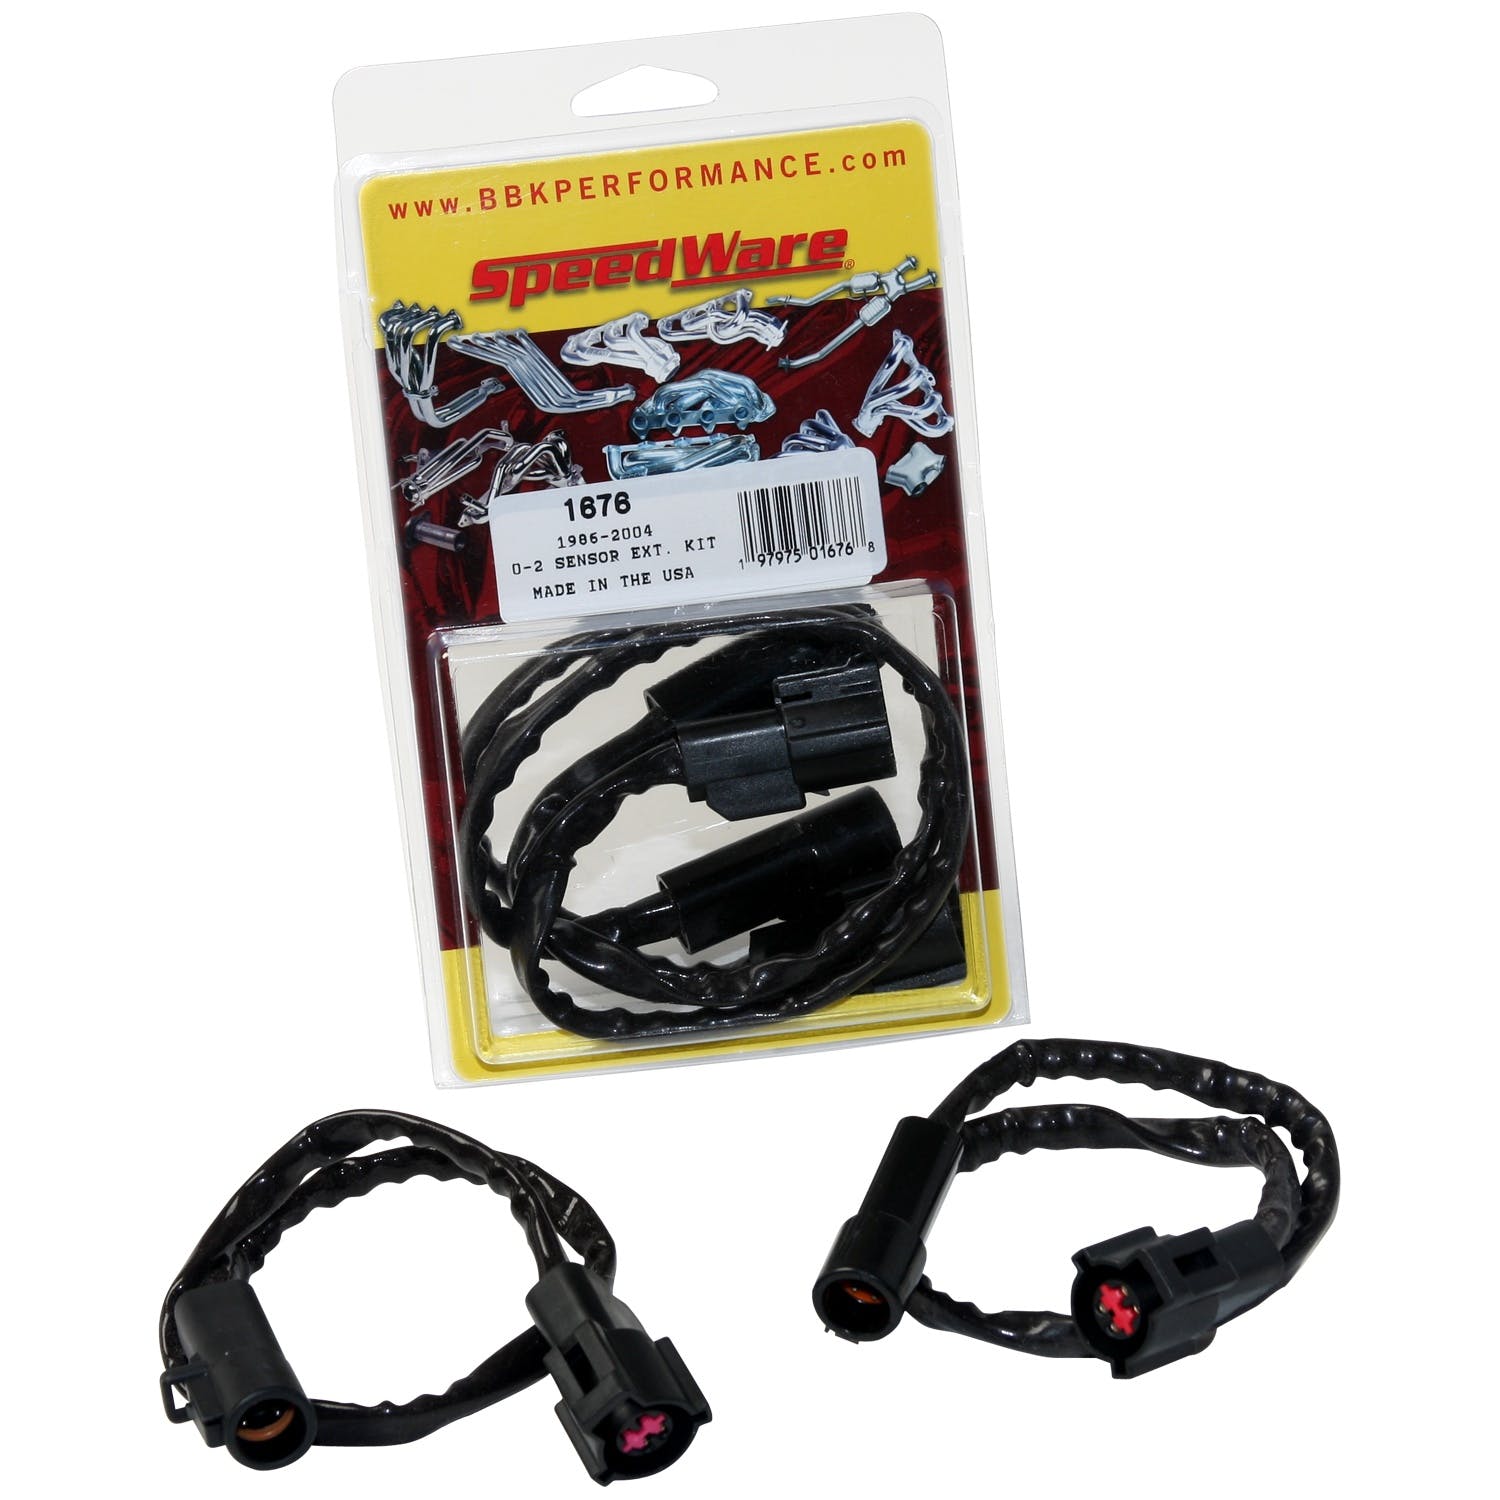 BBK Performance Parts 1676 O2 Sensor Wire Extension Harness